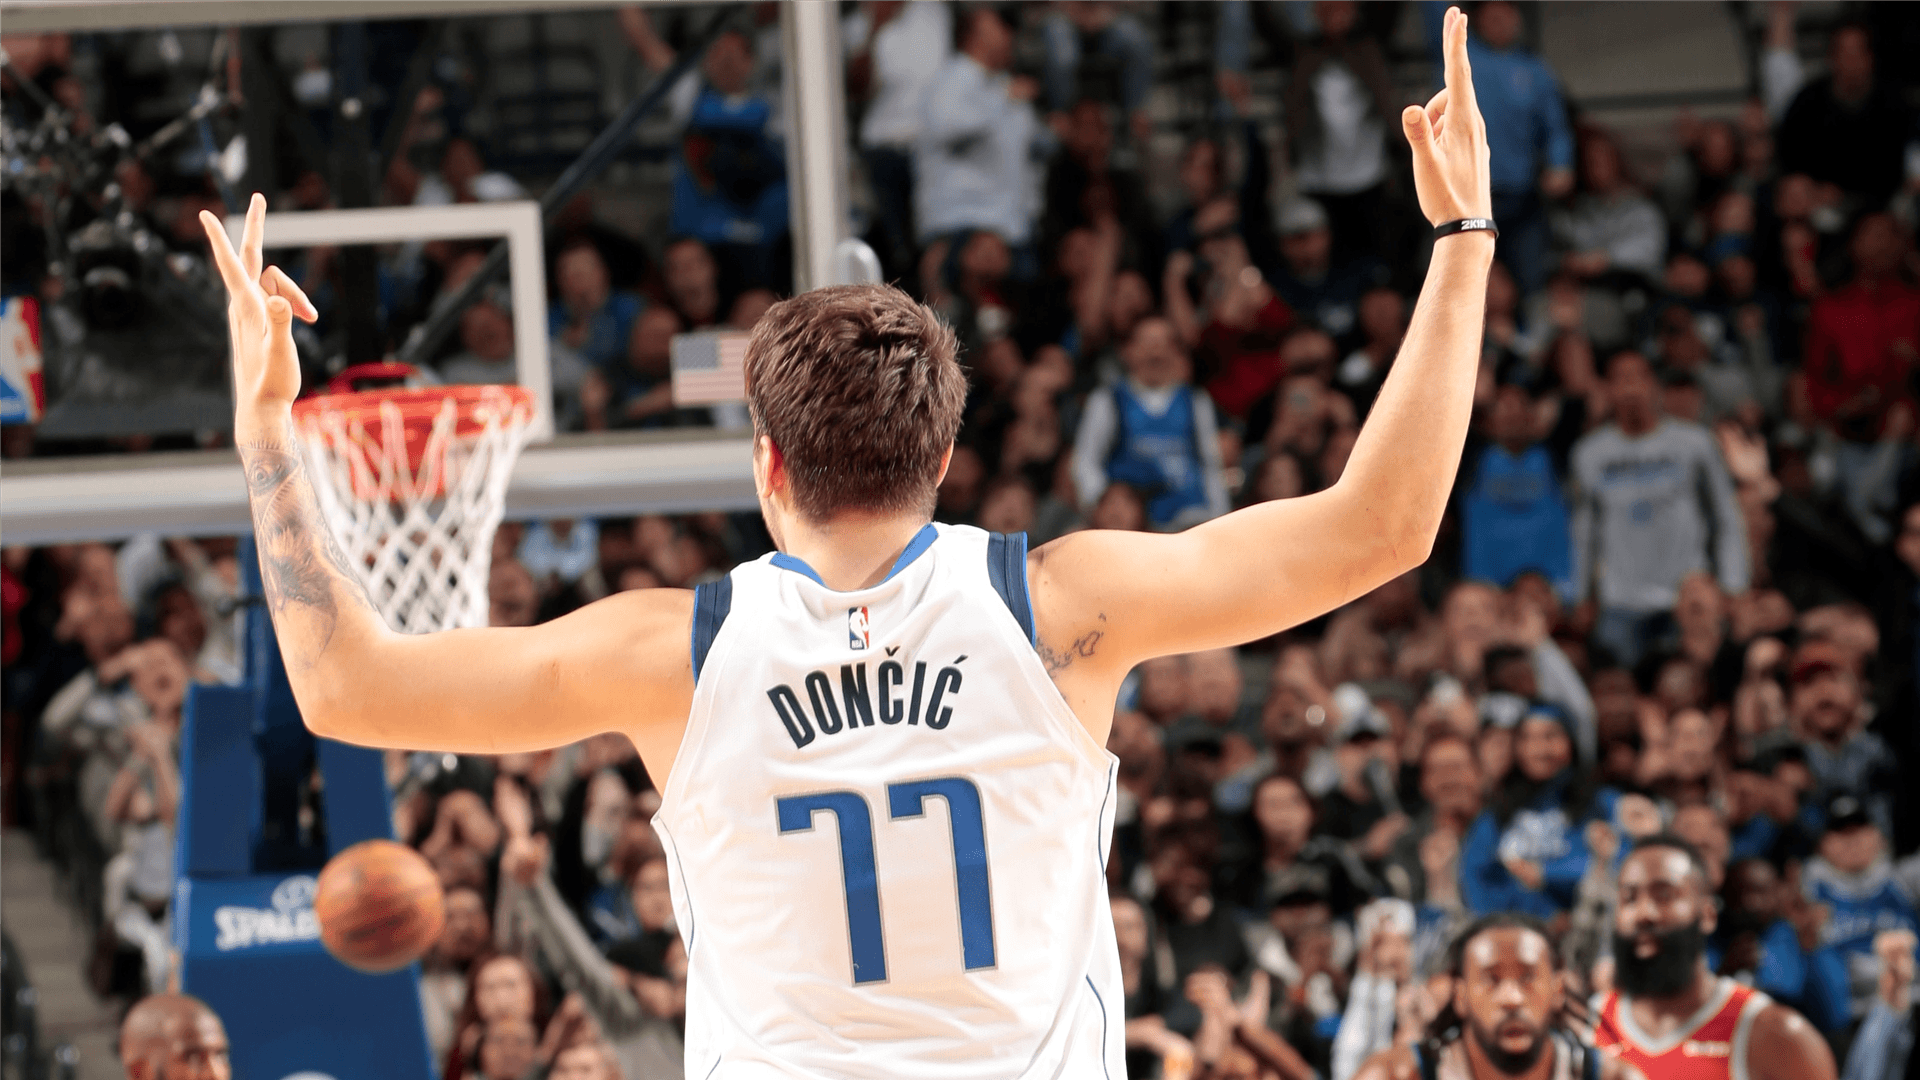 Running diary of the great rookie season for Luka Doncic